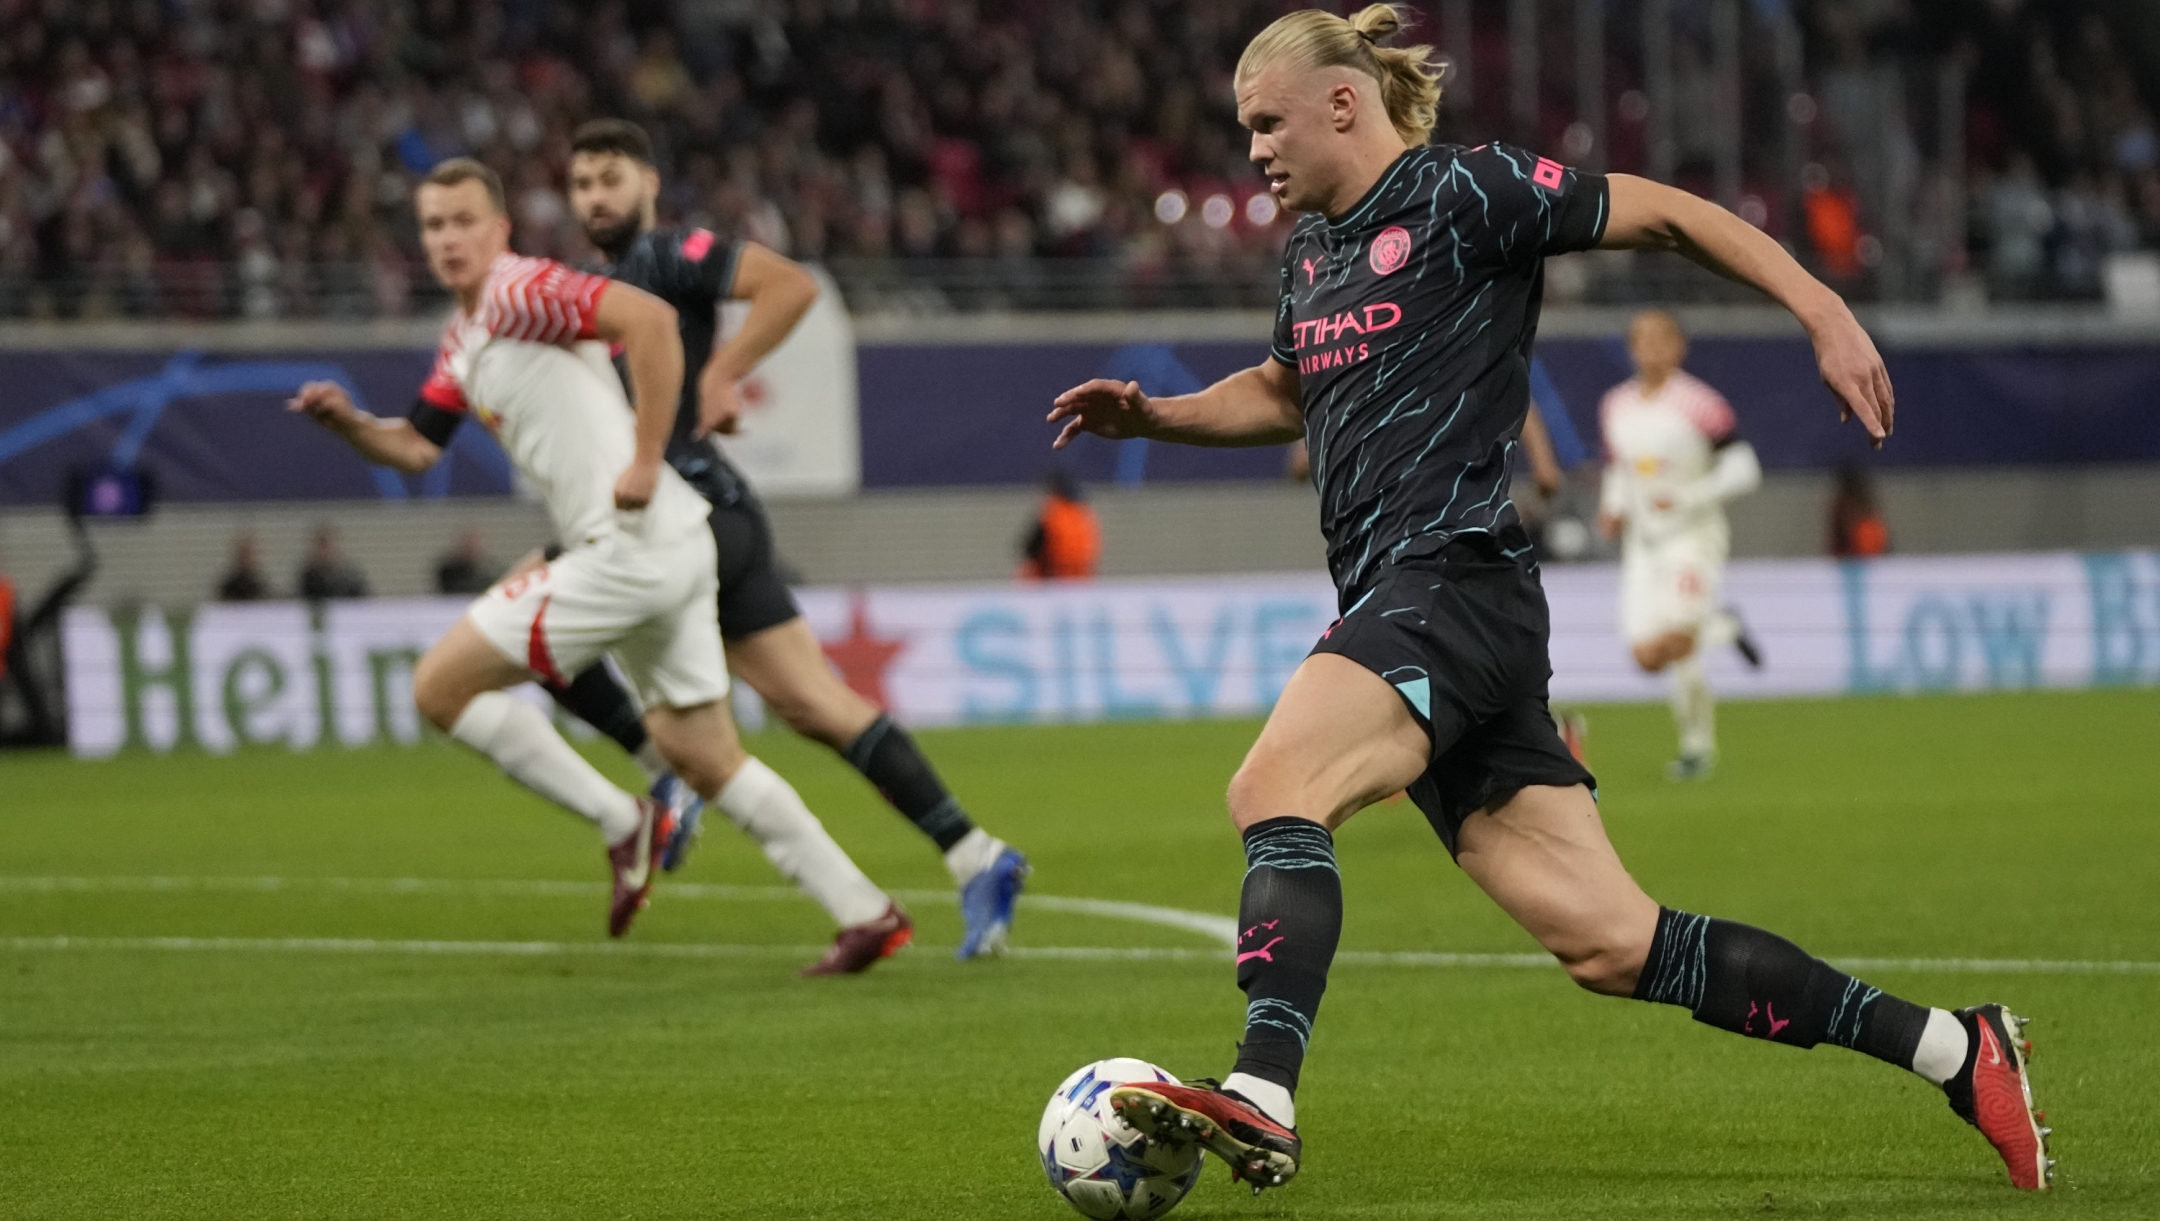 Manchester City's Erling Haaland controls the ball during the Champions League group G soccer match between RB Leipzig and Manchester City in Leipzig, Germany, Wednesday, Oct. 4, 2023. (AP Photo/Matthias Schrader)